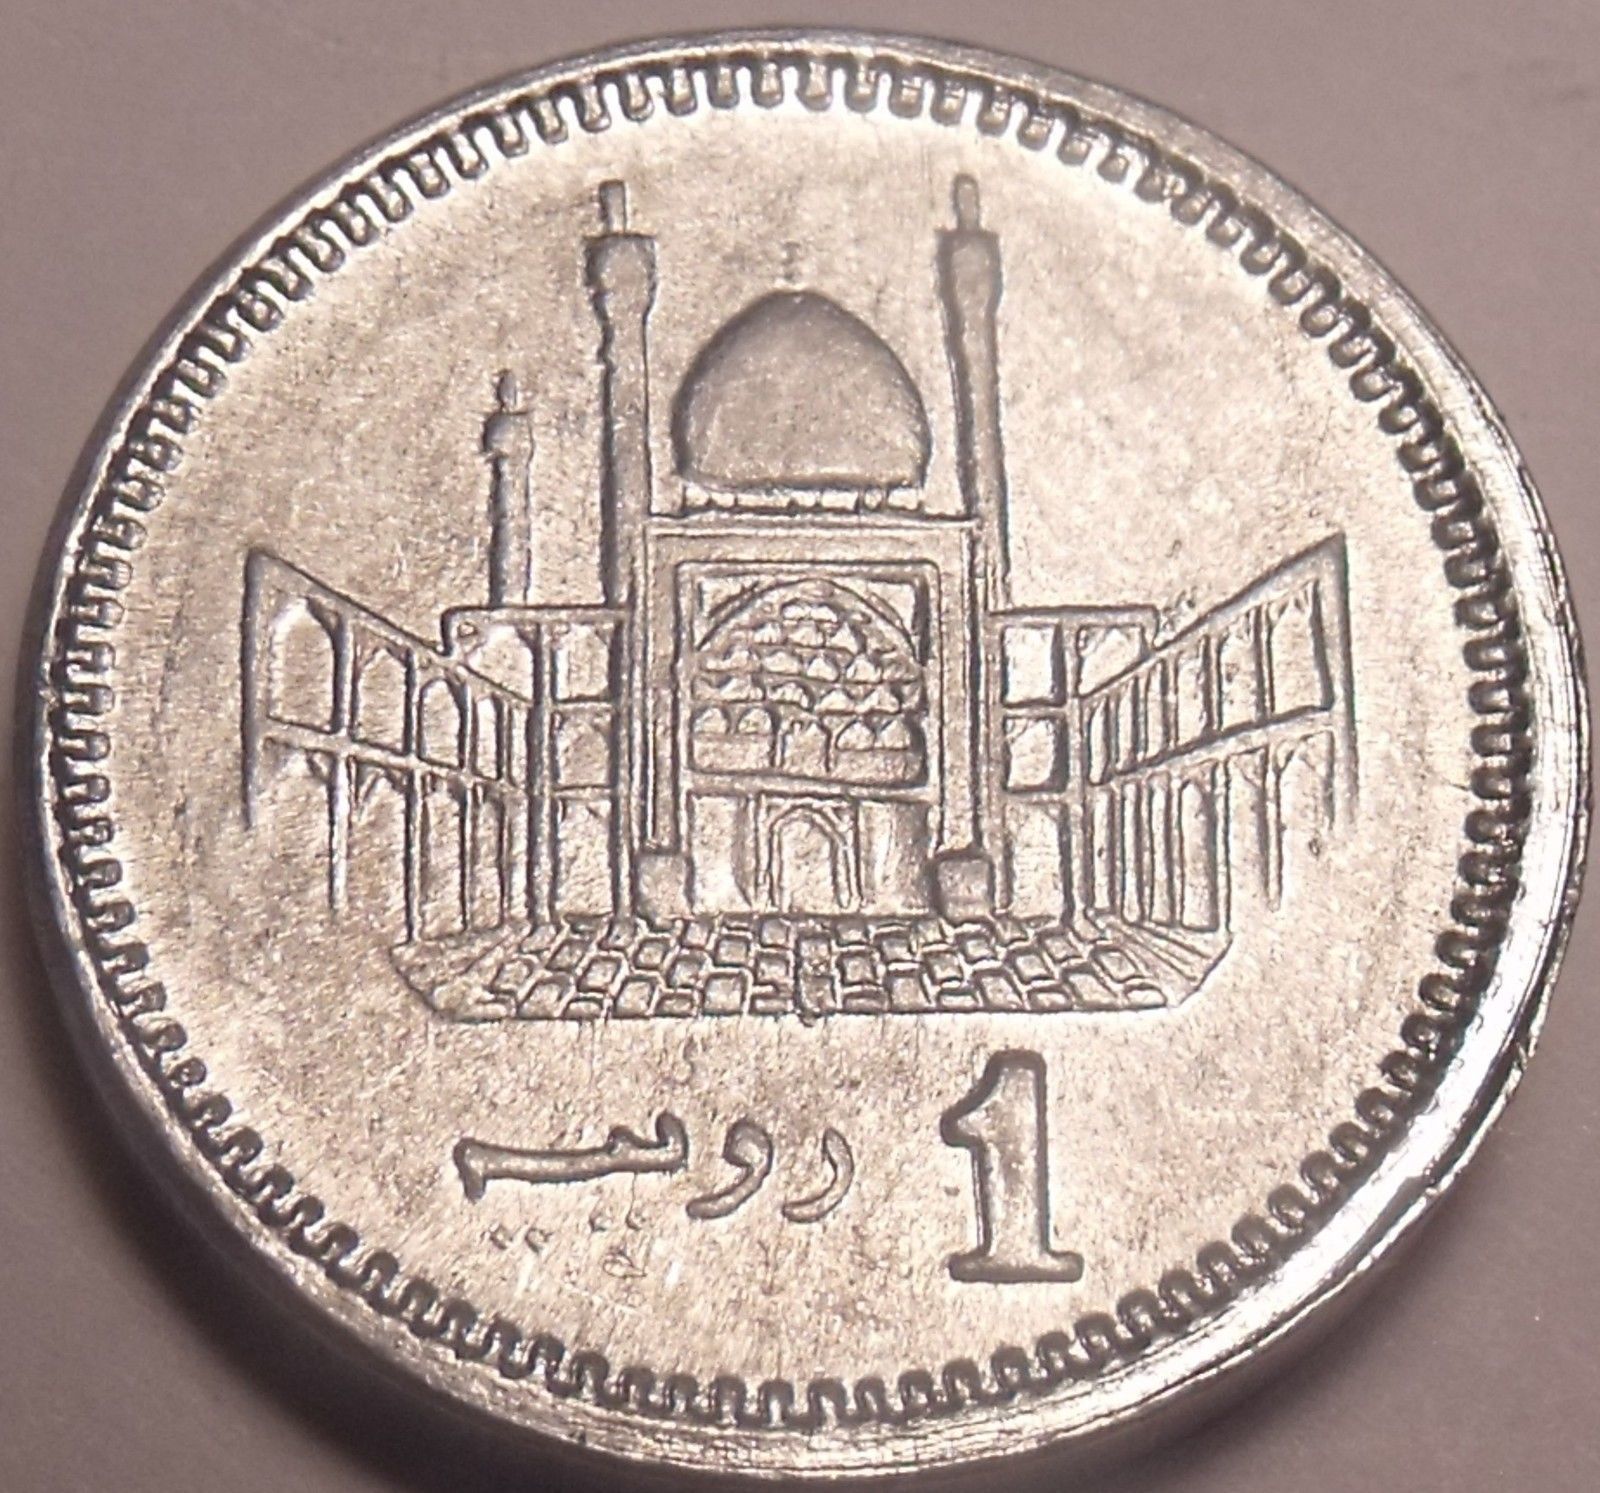 Gem Uncirculated Pakistan 2012 One Rupee~We Have Middle Eastern Coins